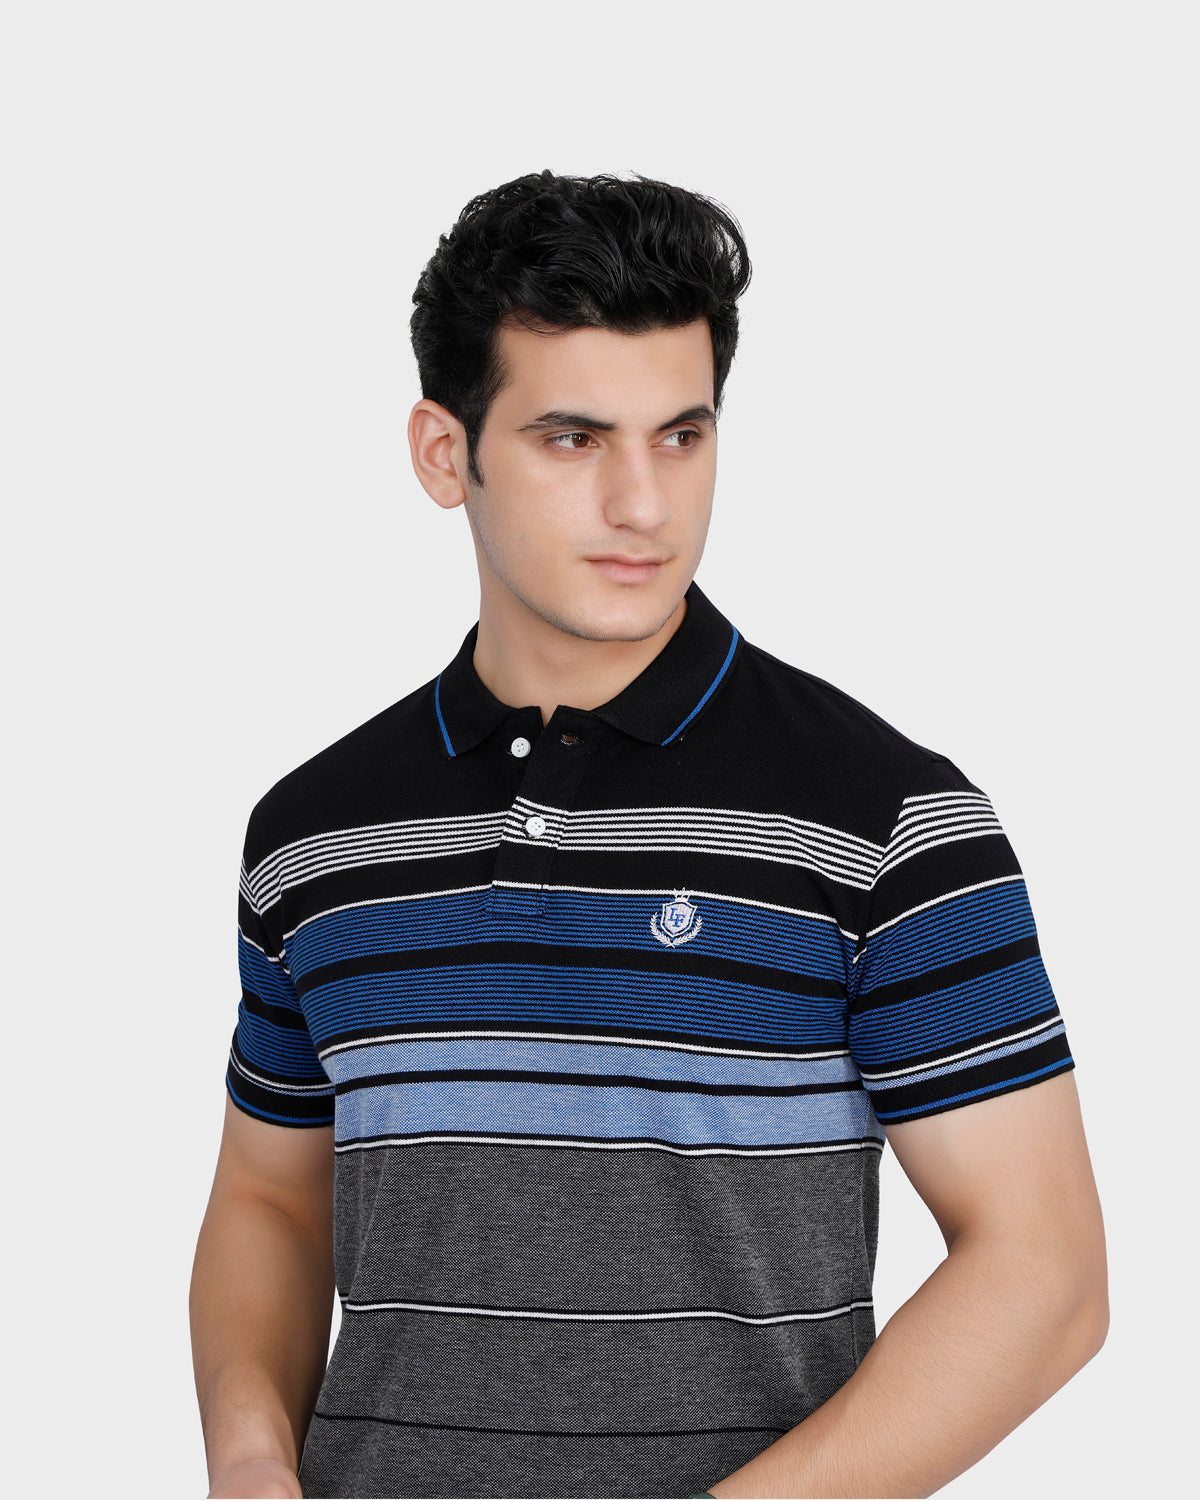 Multicolor Striped Polo T-shirt with Cutaway Collar - Blue/Grey